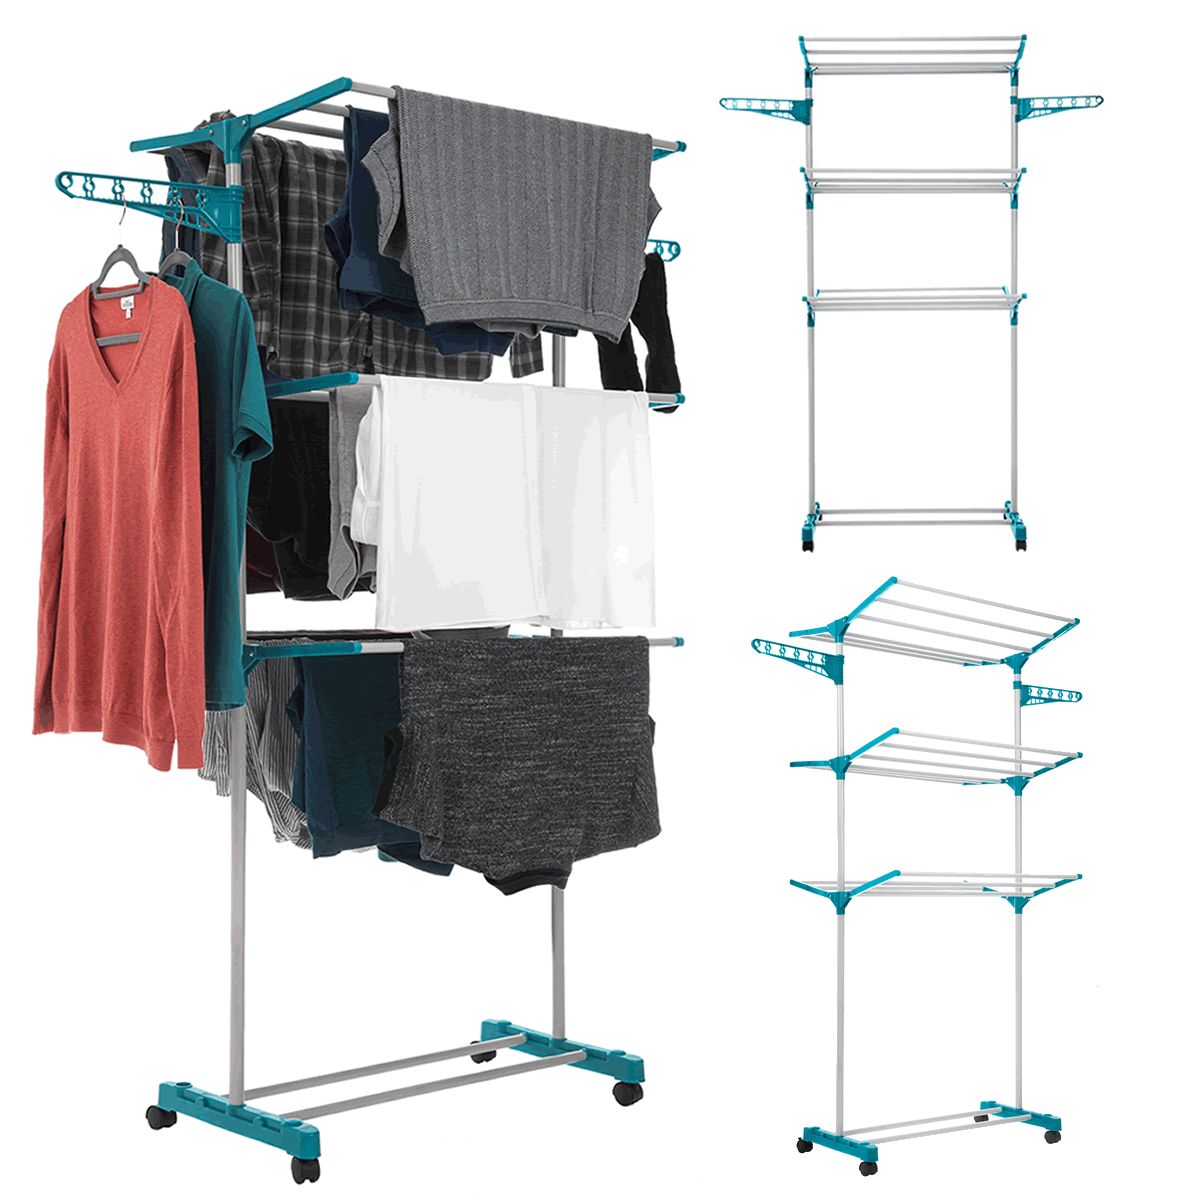 3 Tier Foldable Laundry Airer Clothes Drying Rack with Wheels Deluxe Indoor /& Outdoor